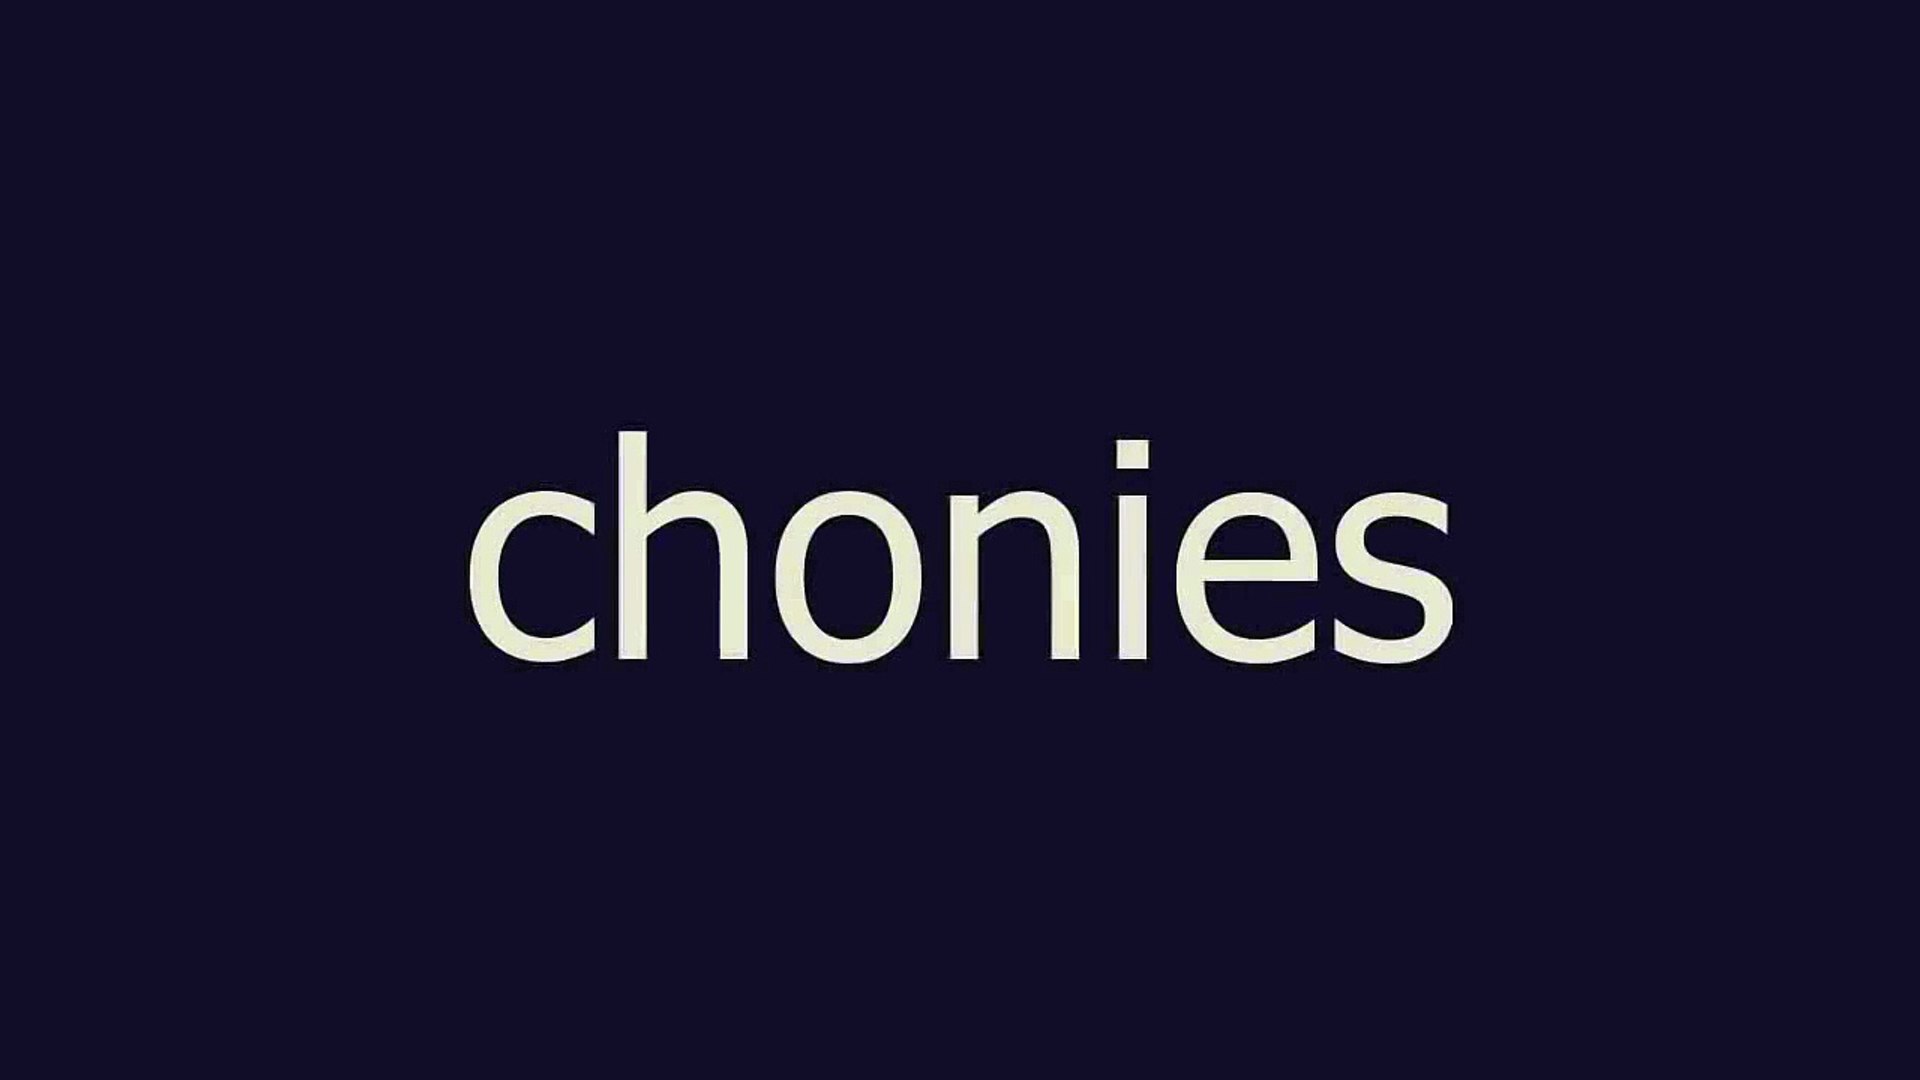 chonies meaning and pronunciation - video Dailymotion